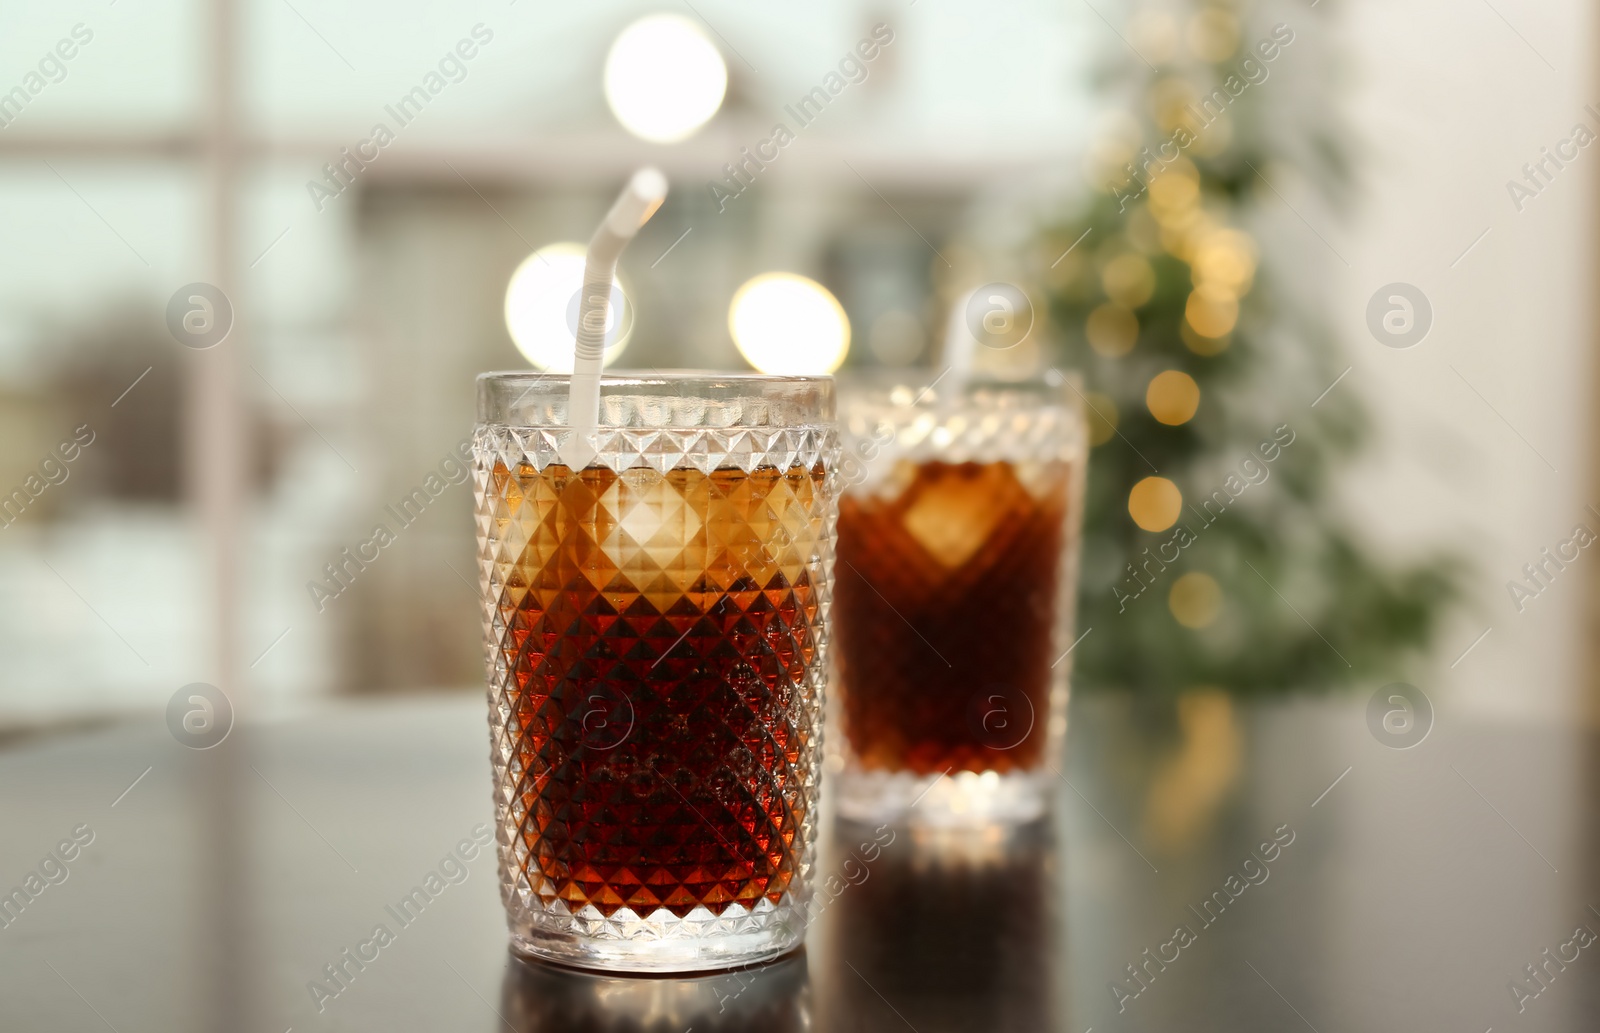 Photo of Glasses of cold cola on table against blurred background